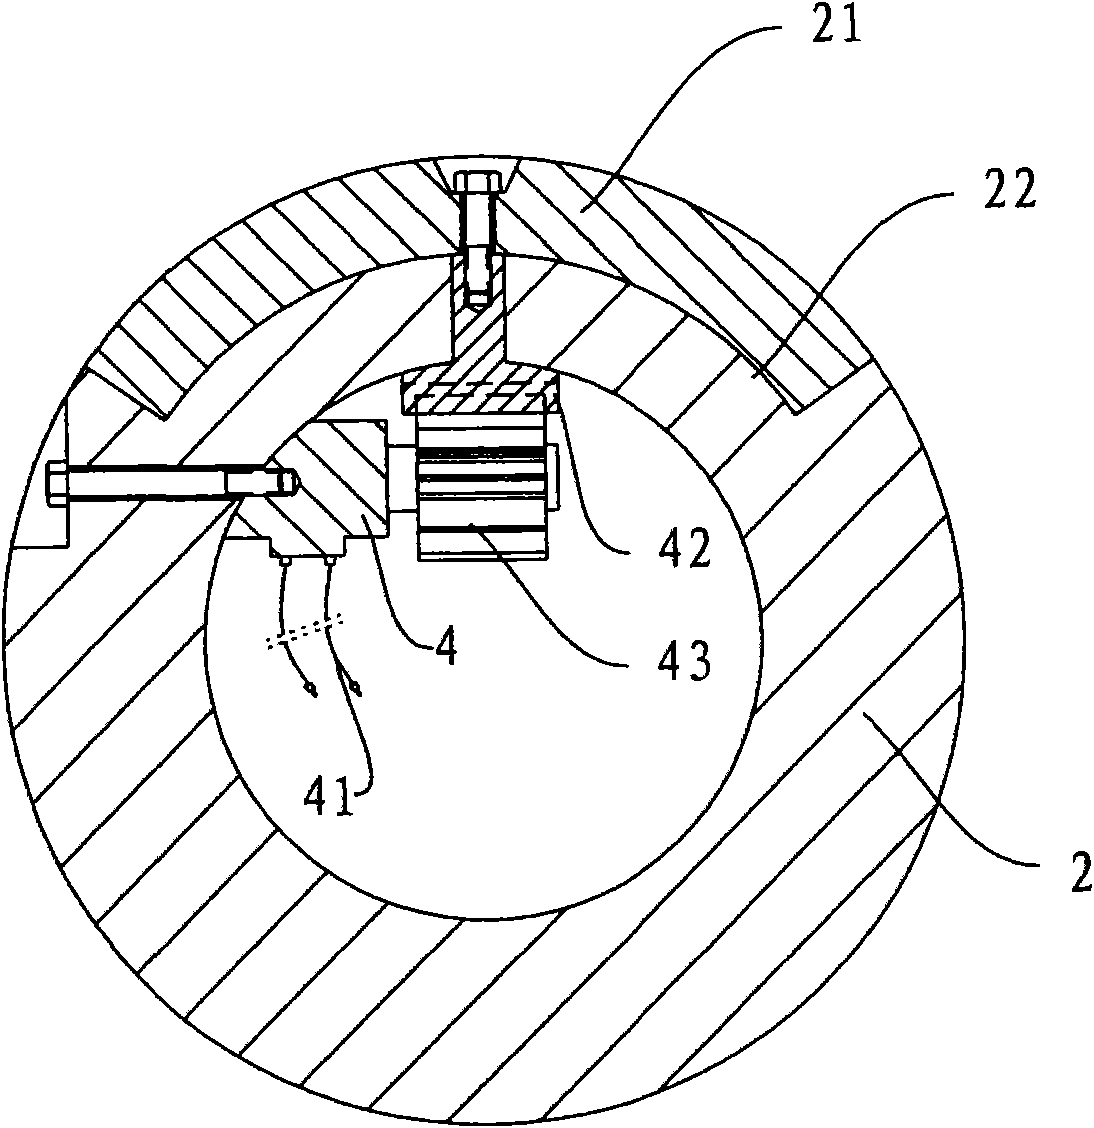 Device and method for measurement while drilling of ground stress